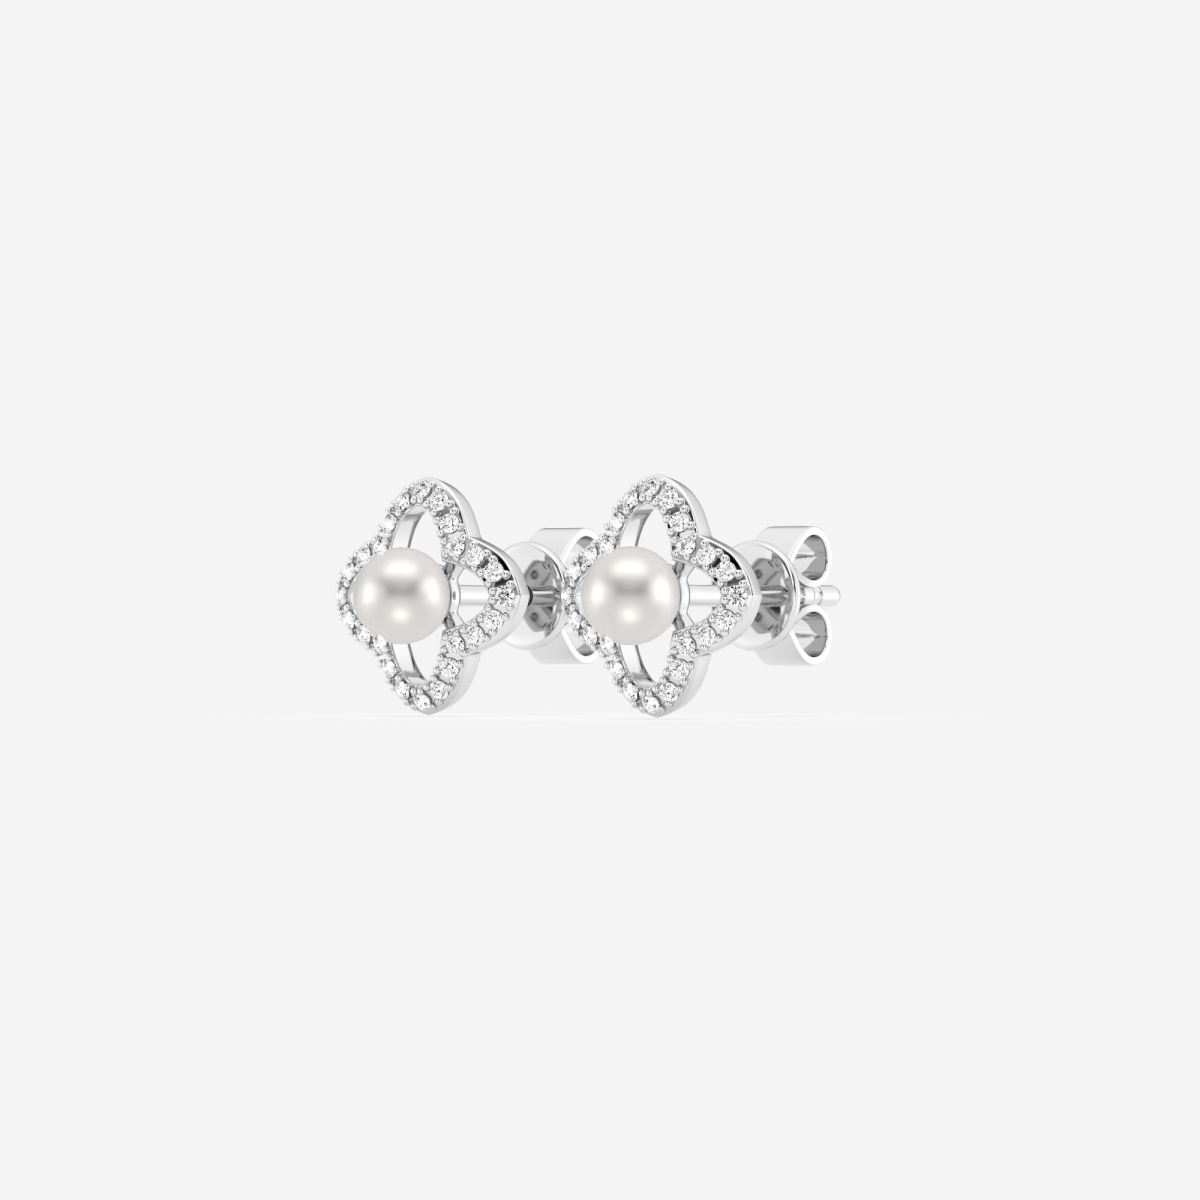 Additional Image 1 for  3.5 - 4.0 mm Cultured Freshwater Pearl and 1/5 ctw Lab Grown Diamond Clover Drop Earrings